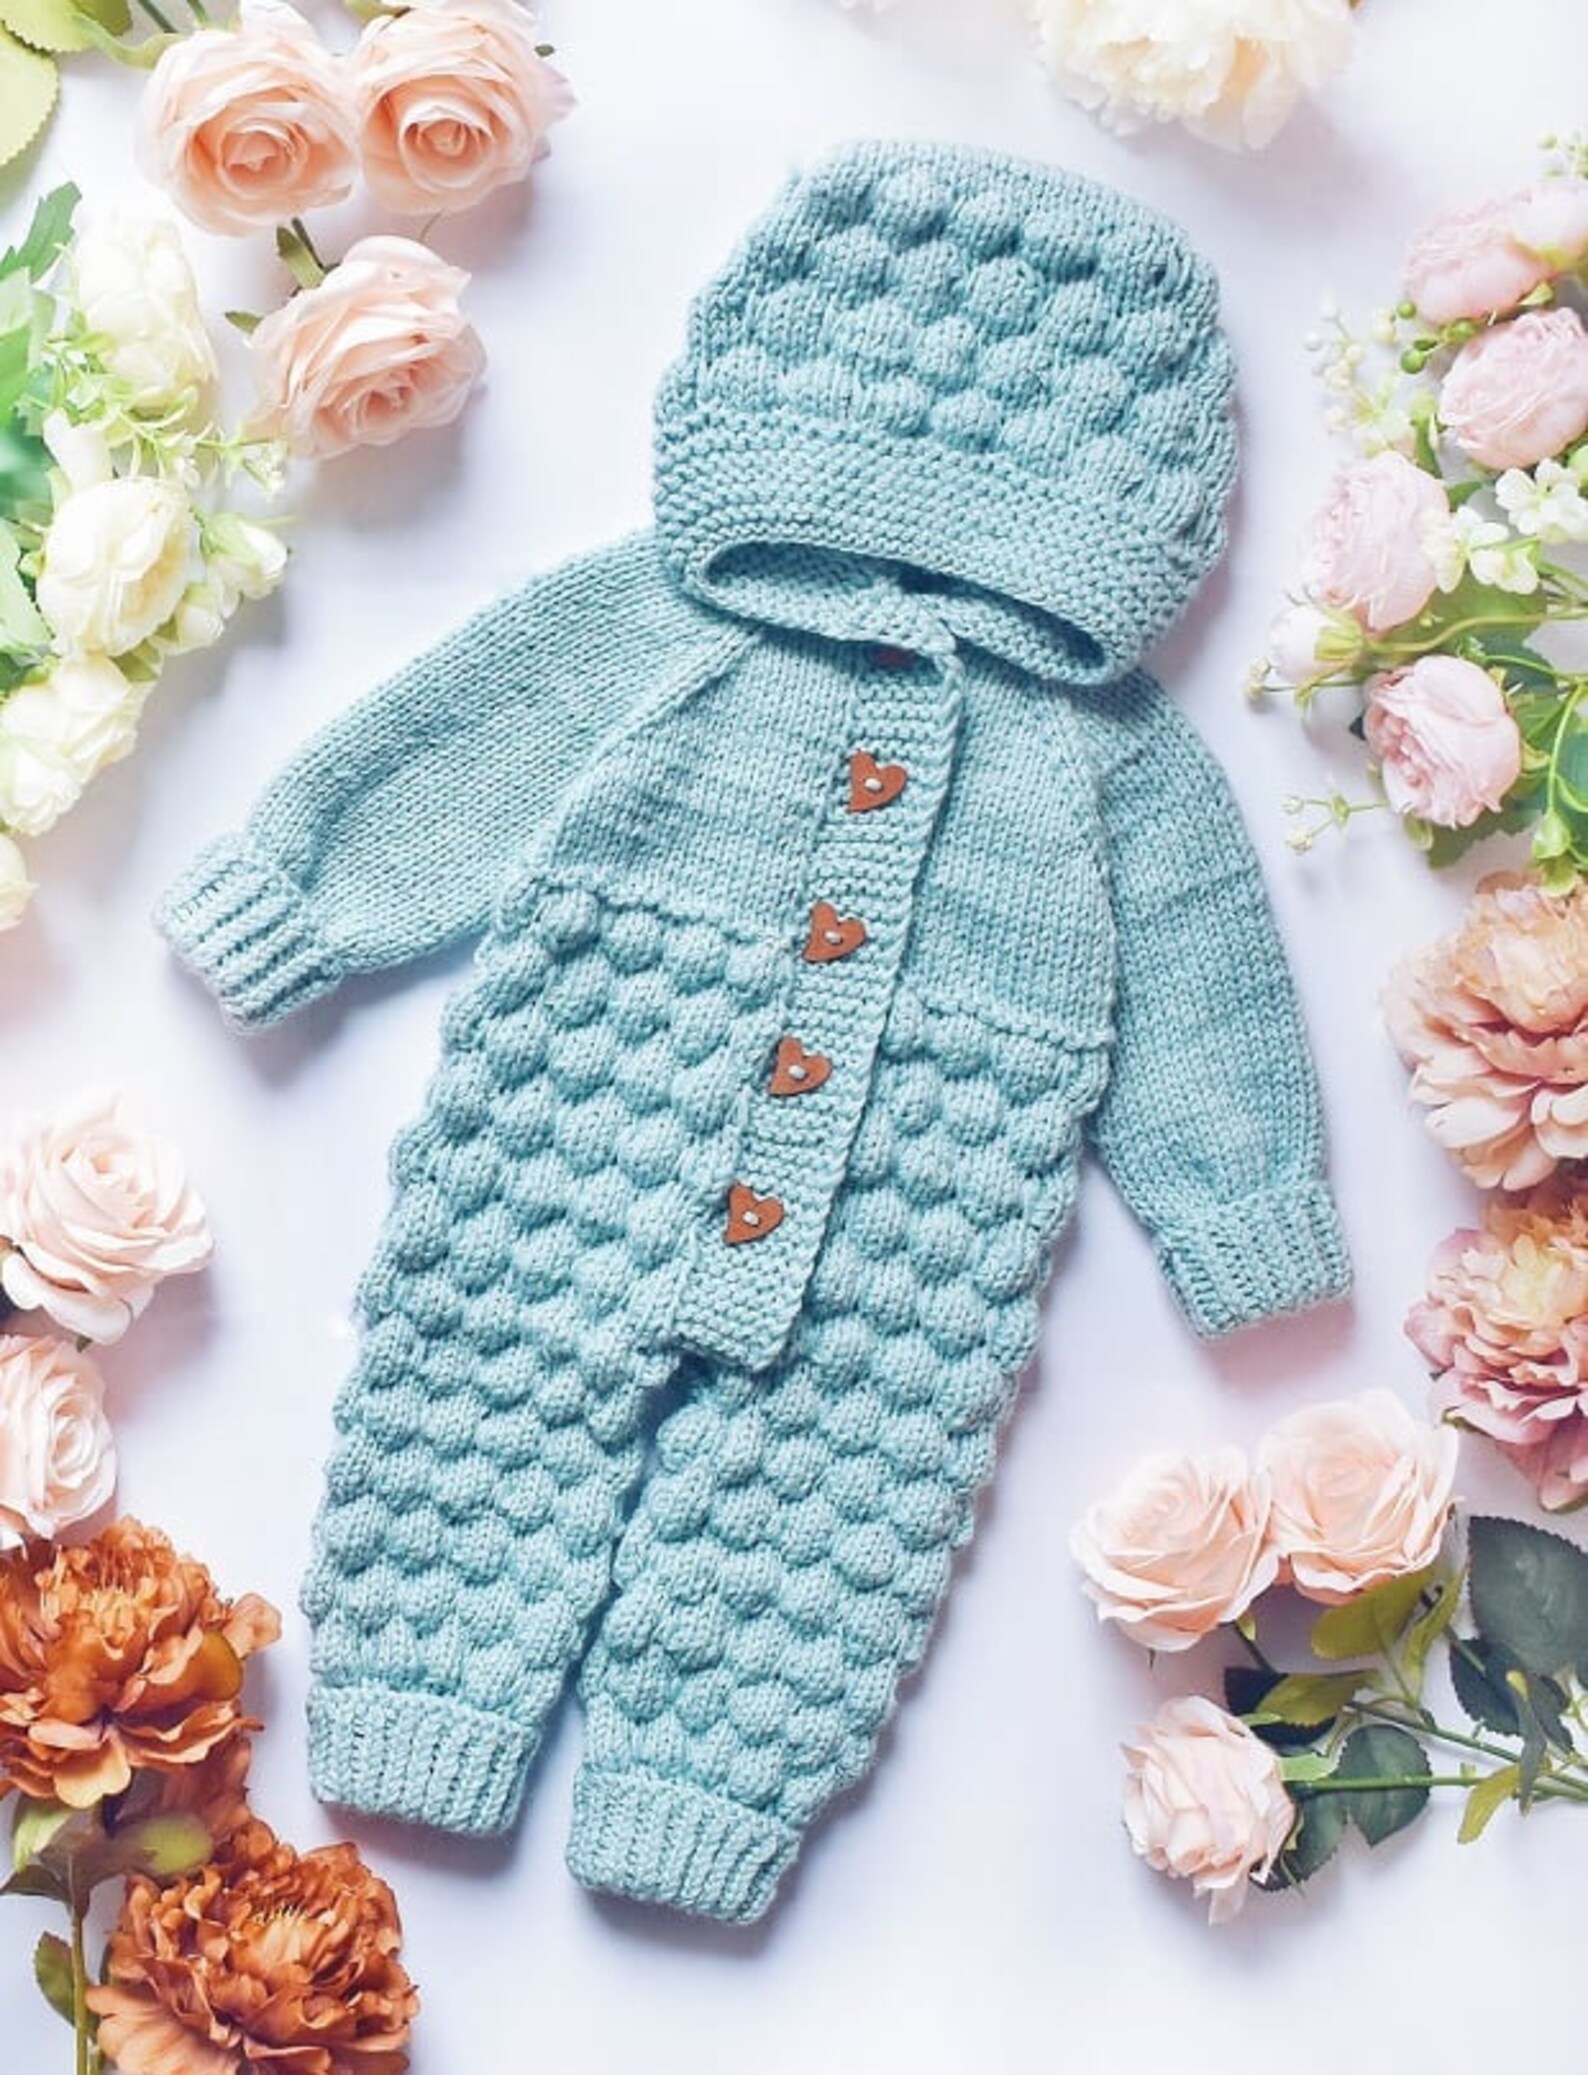 NEW PATTERN / Knitted Baby Bubble Stitch Jumpsuit / O-6 months | Etsy